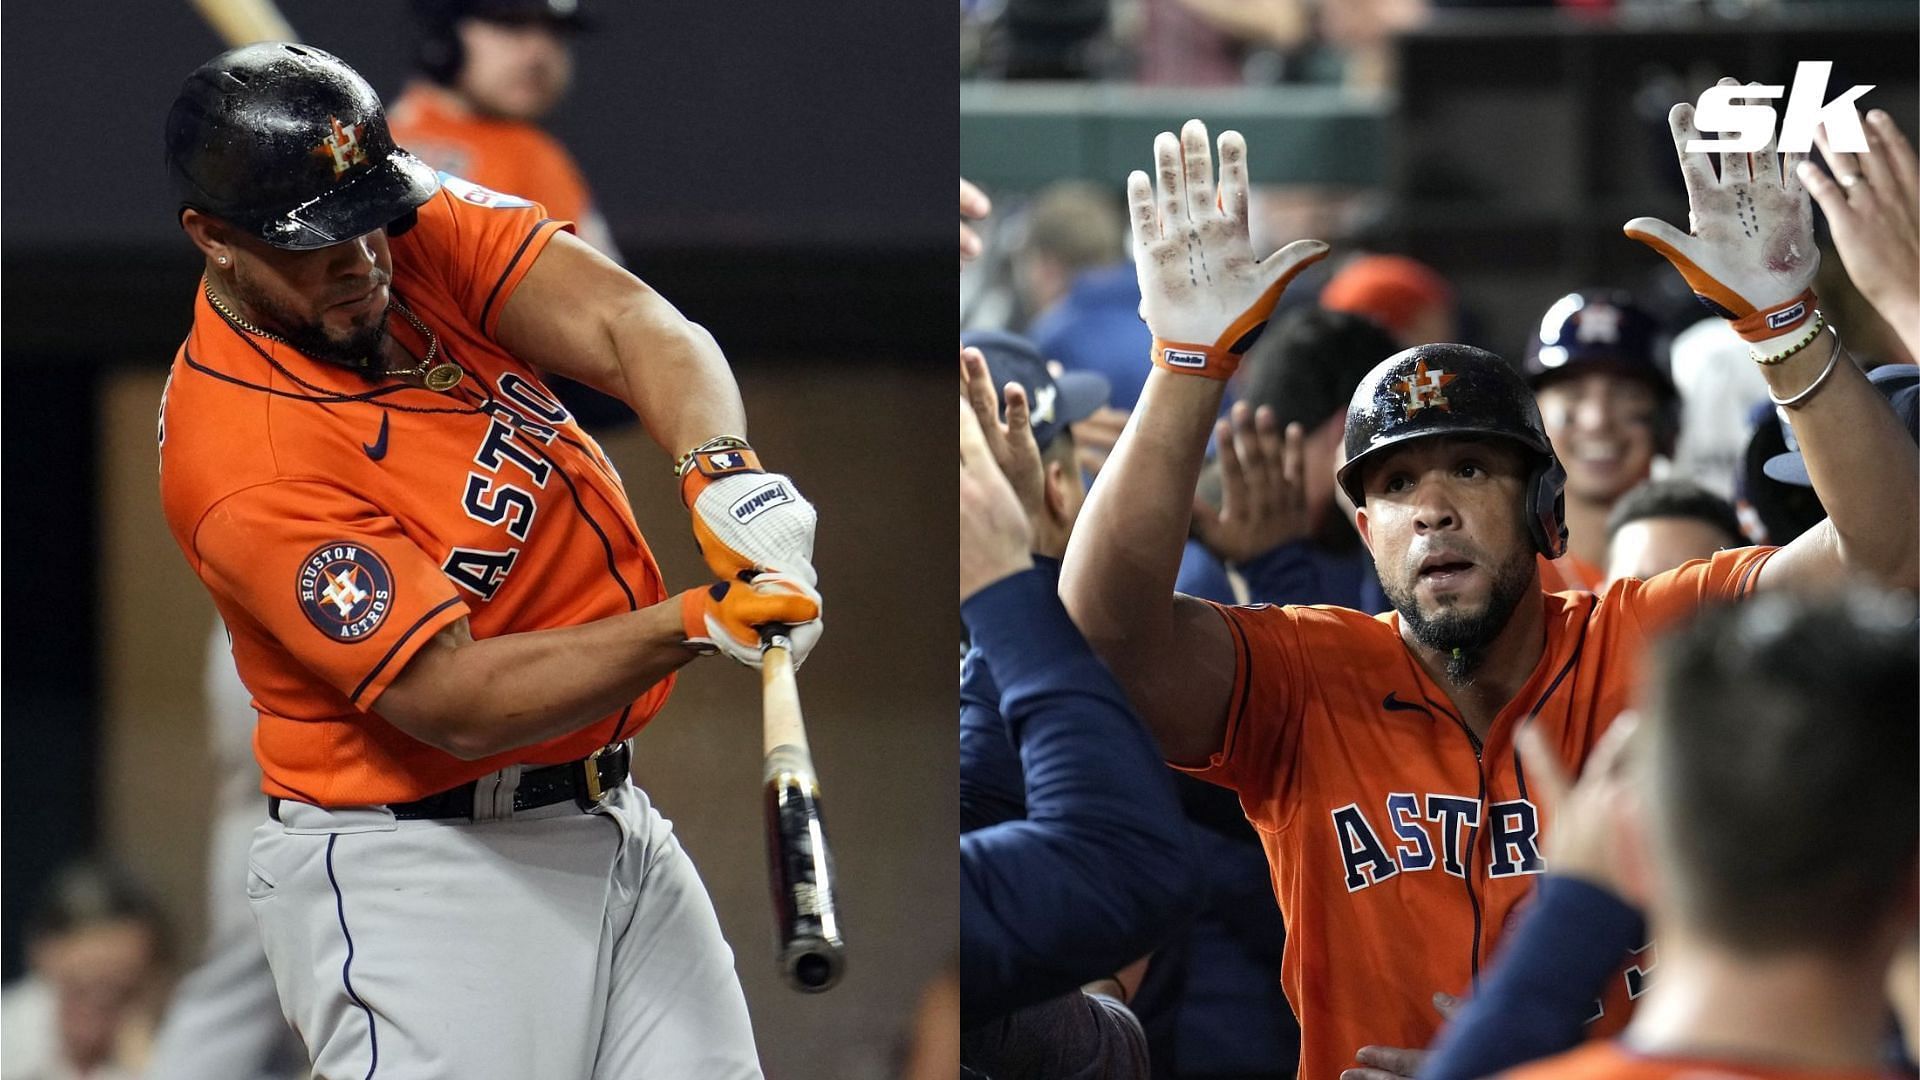 Potential PROOF the Houston Astros were cheating in the 2017